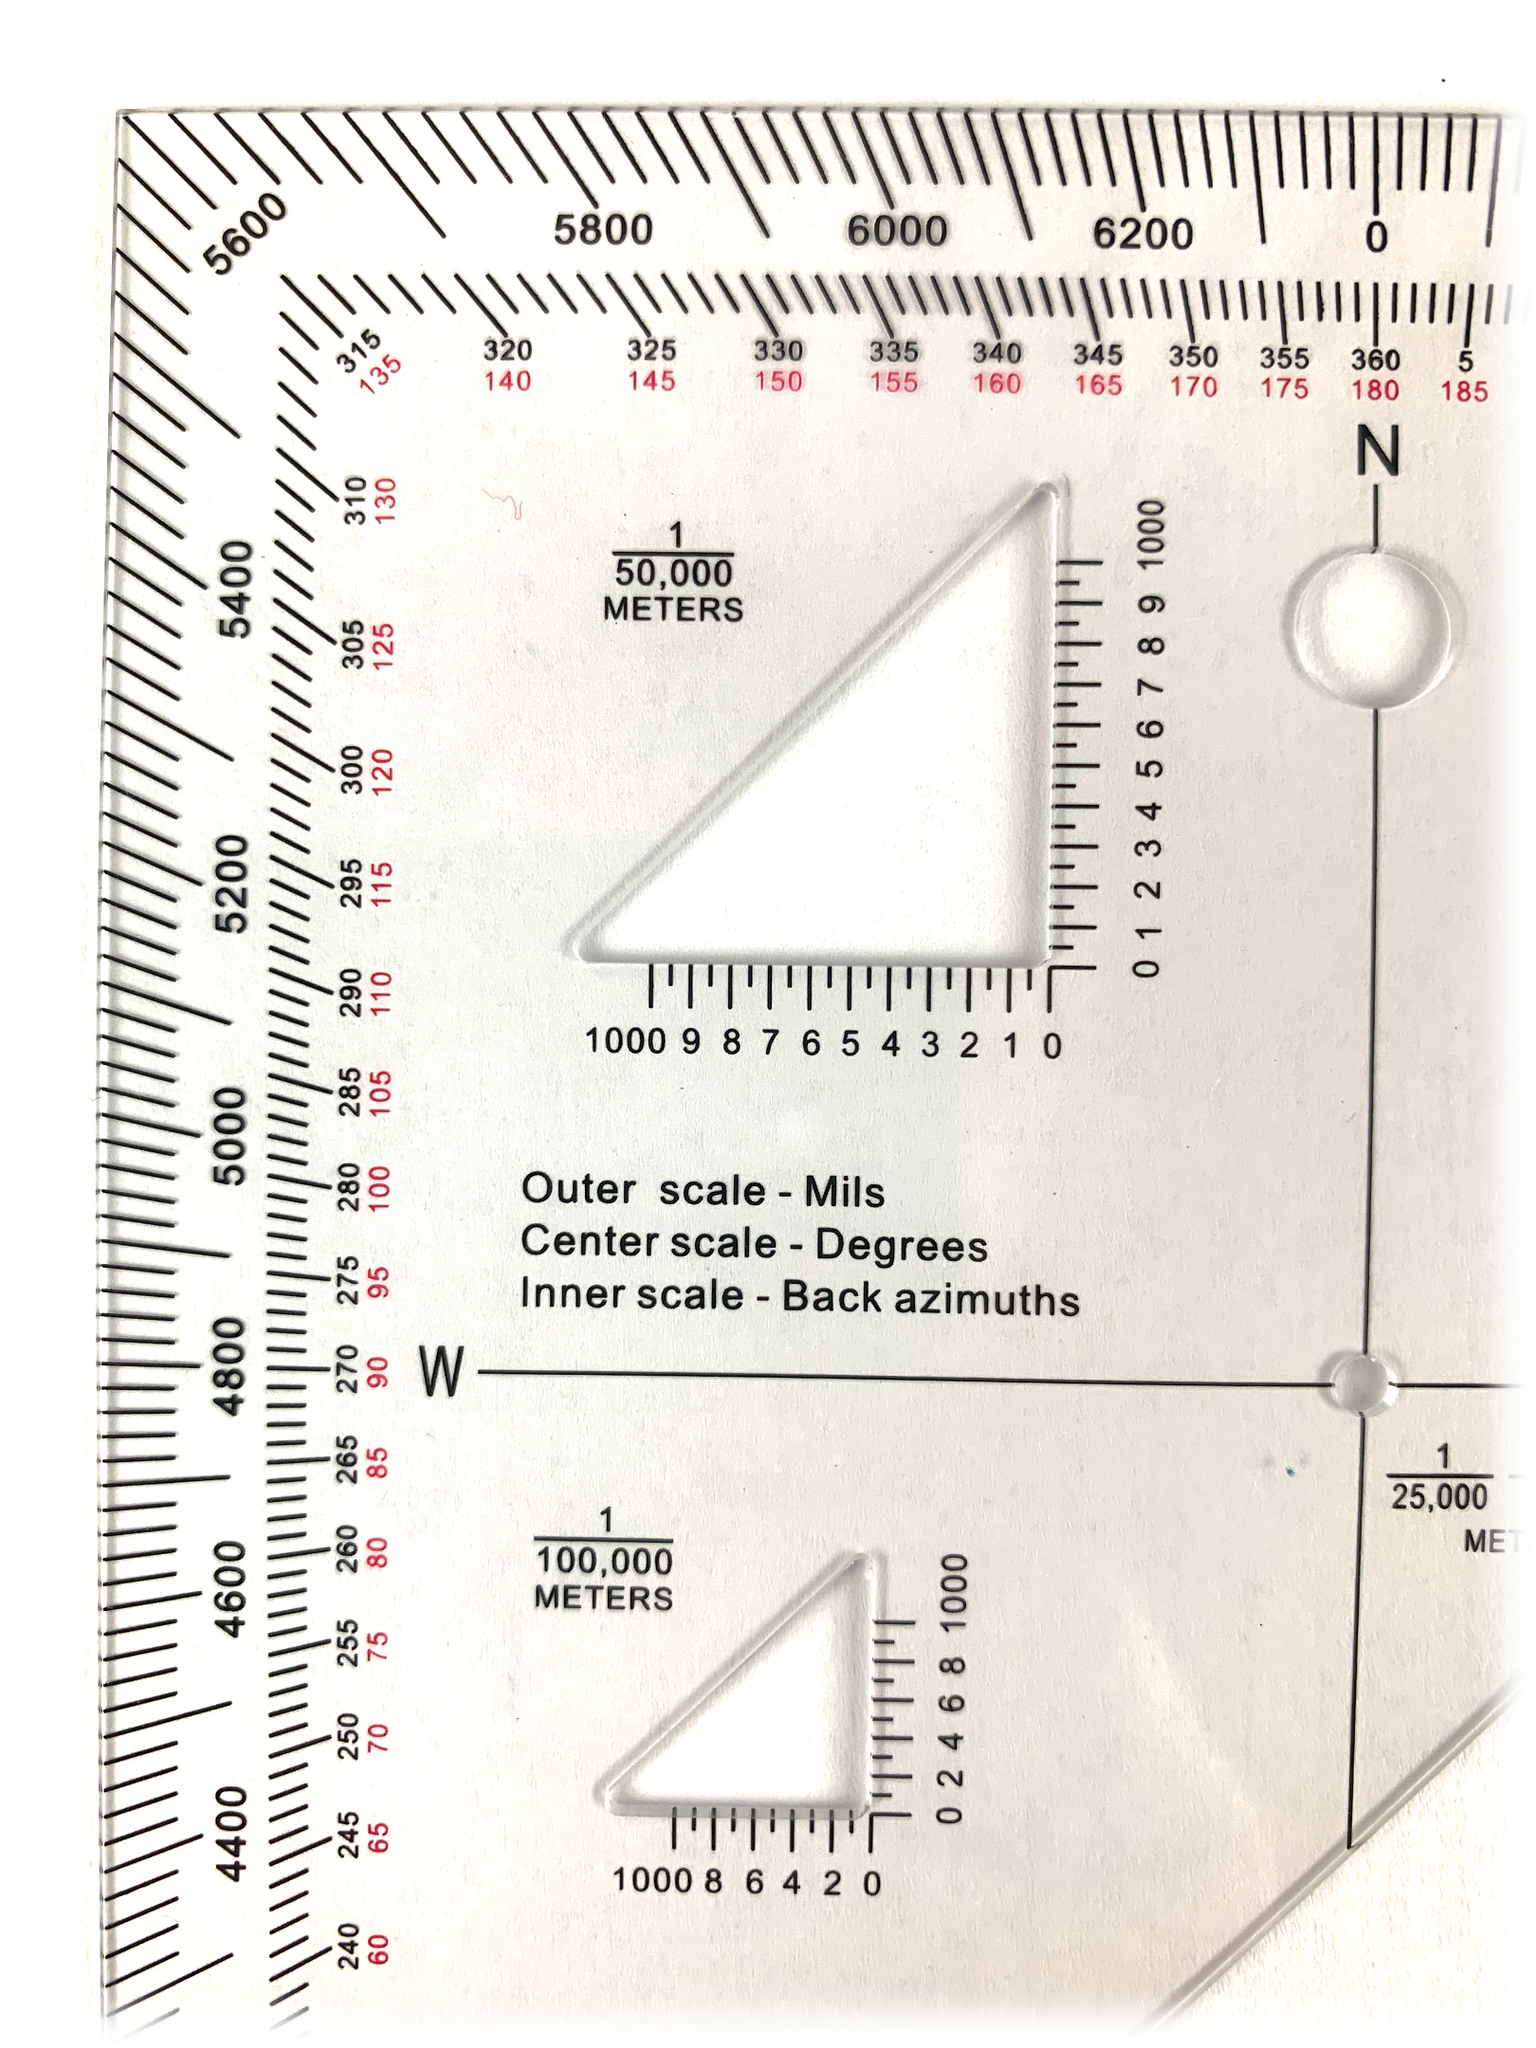 LETHALIFE Military Protractor for Land Navigation